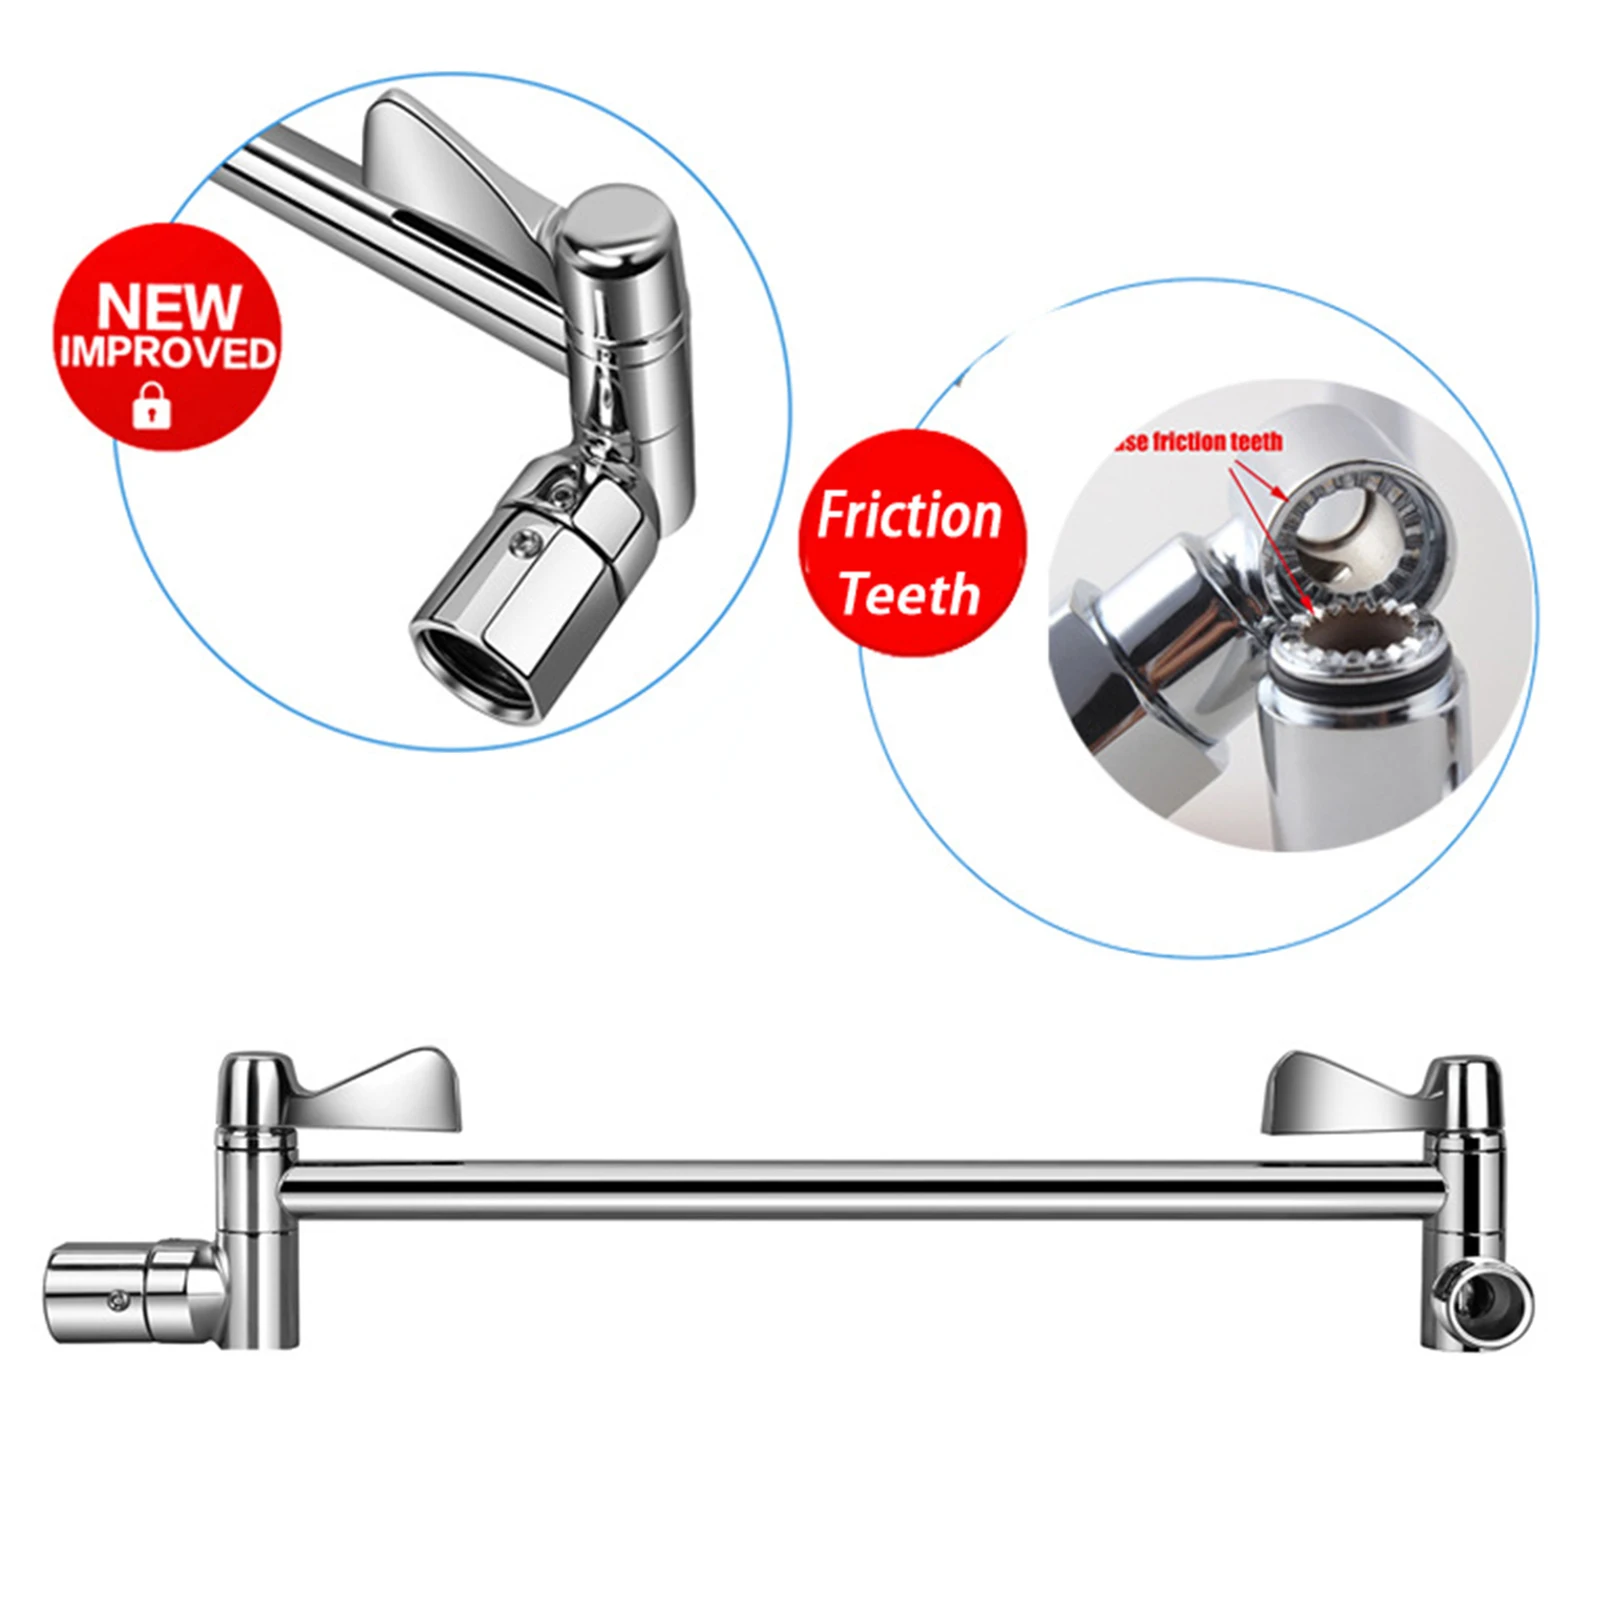 Shower Head Spray Connection,Adjustable Elbow Shower Arm Bracket,With Tooth,Big Handle Extension Rod